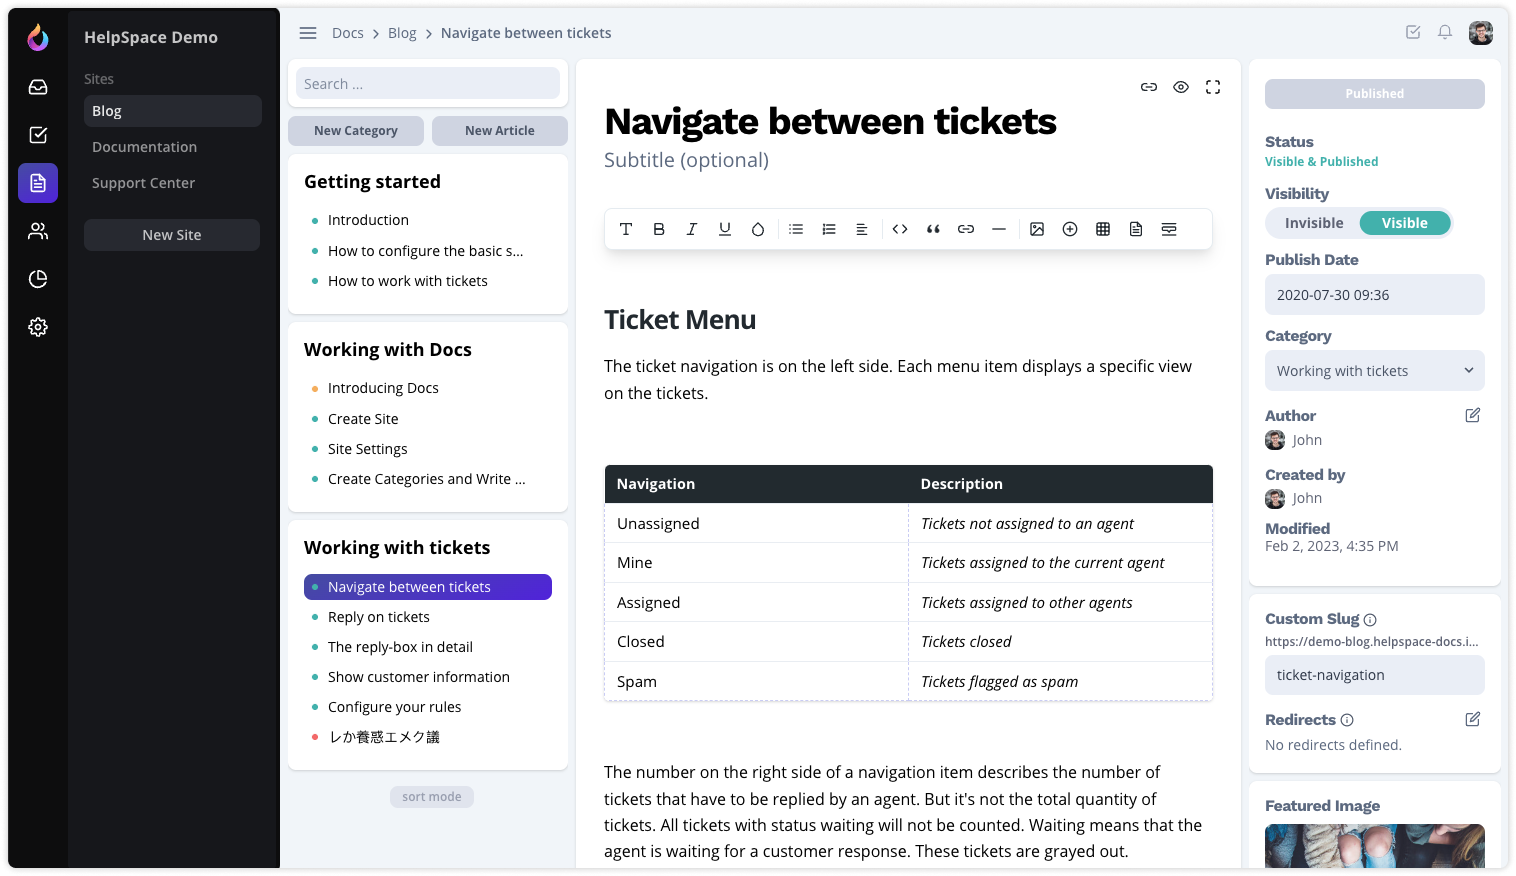 HelpSpace Docs: an integrated knowledge base, which can be shared within the team or with customers, to find solutions in ticket processing or publish information for 24x7 customer access.